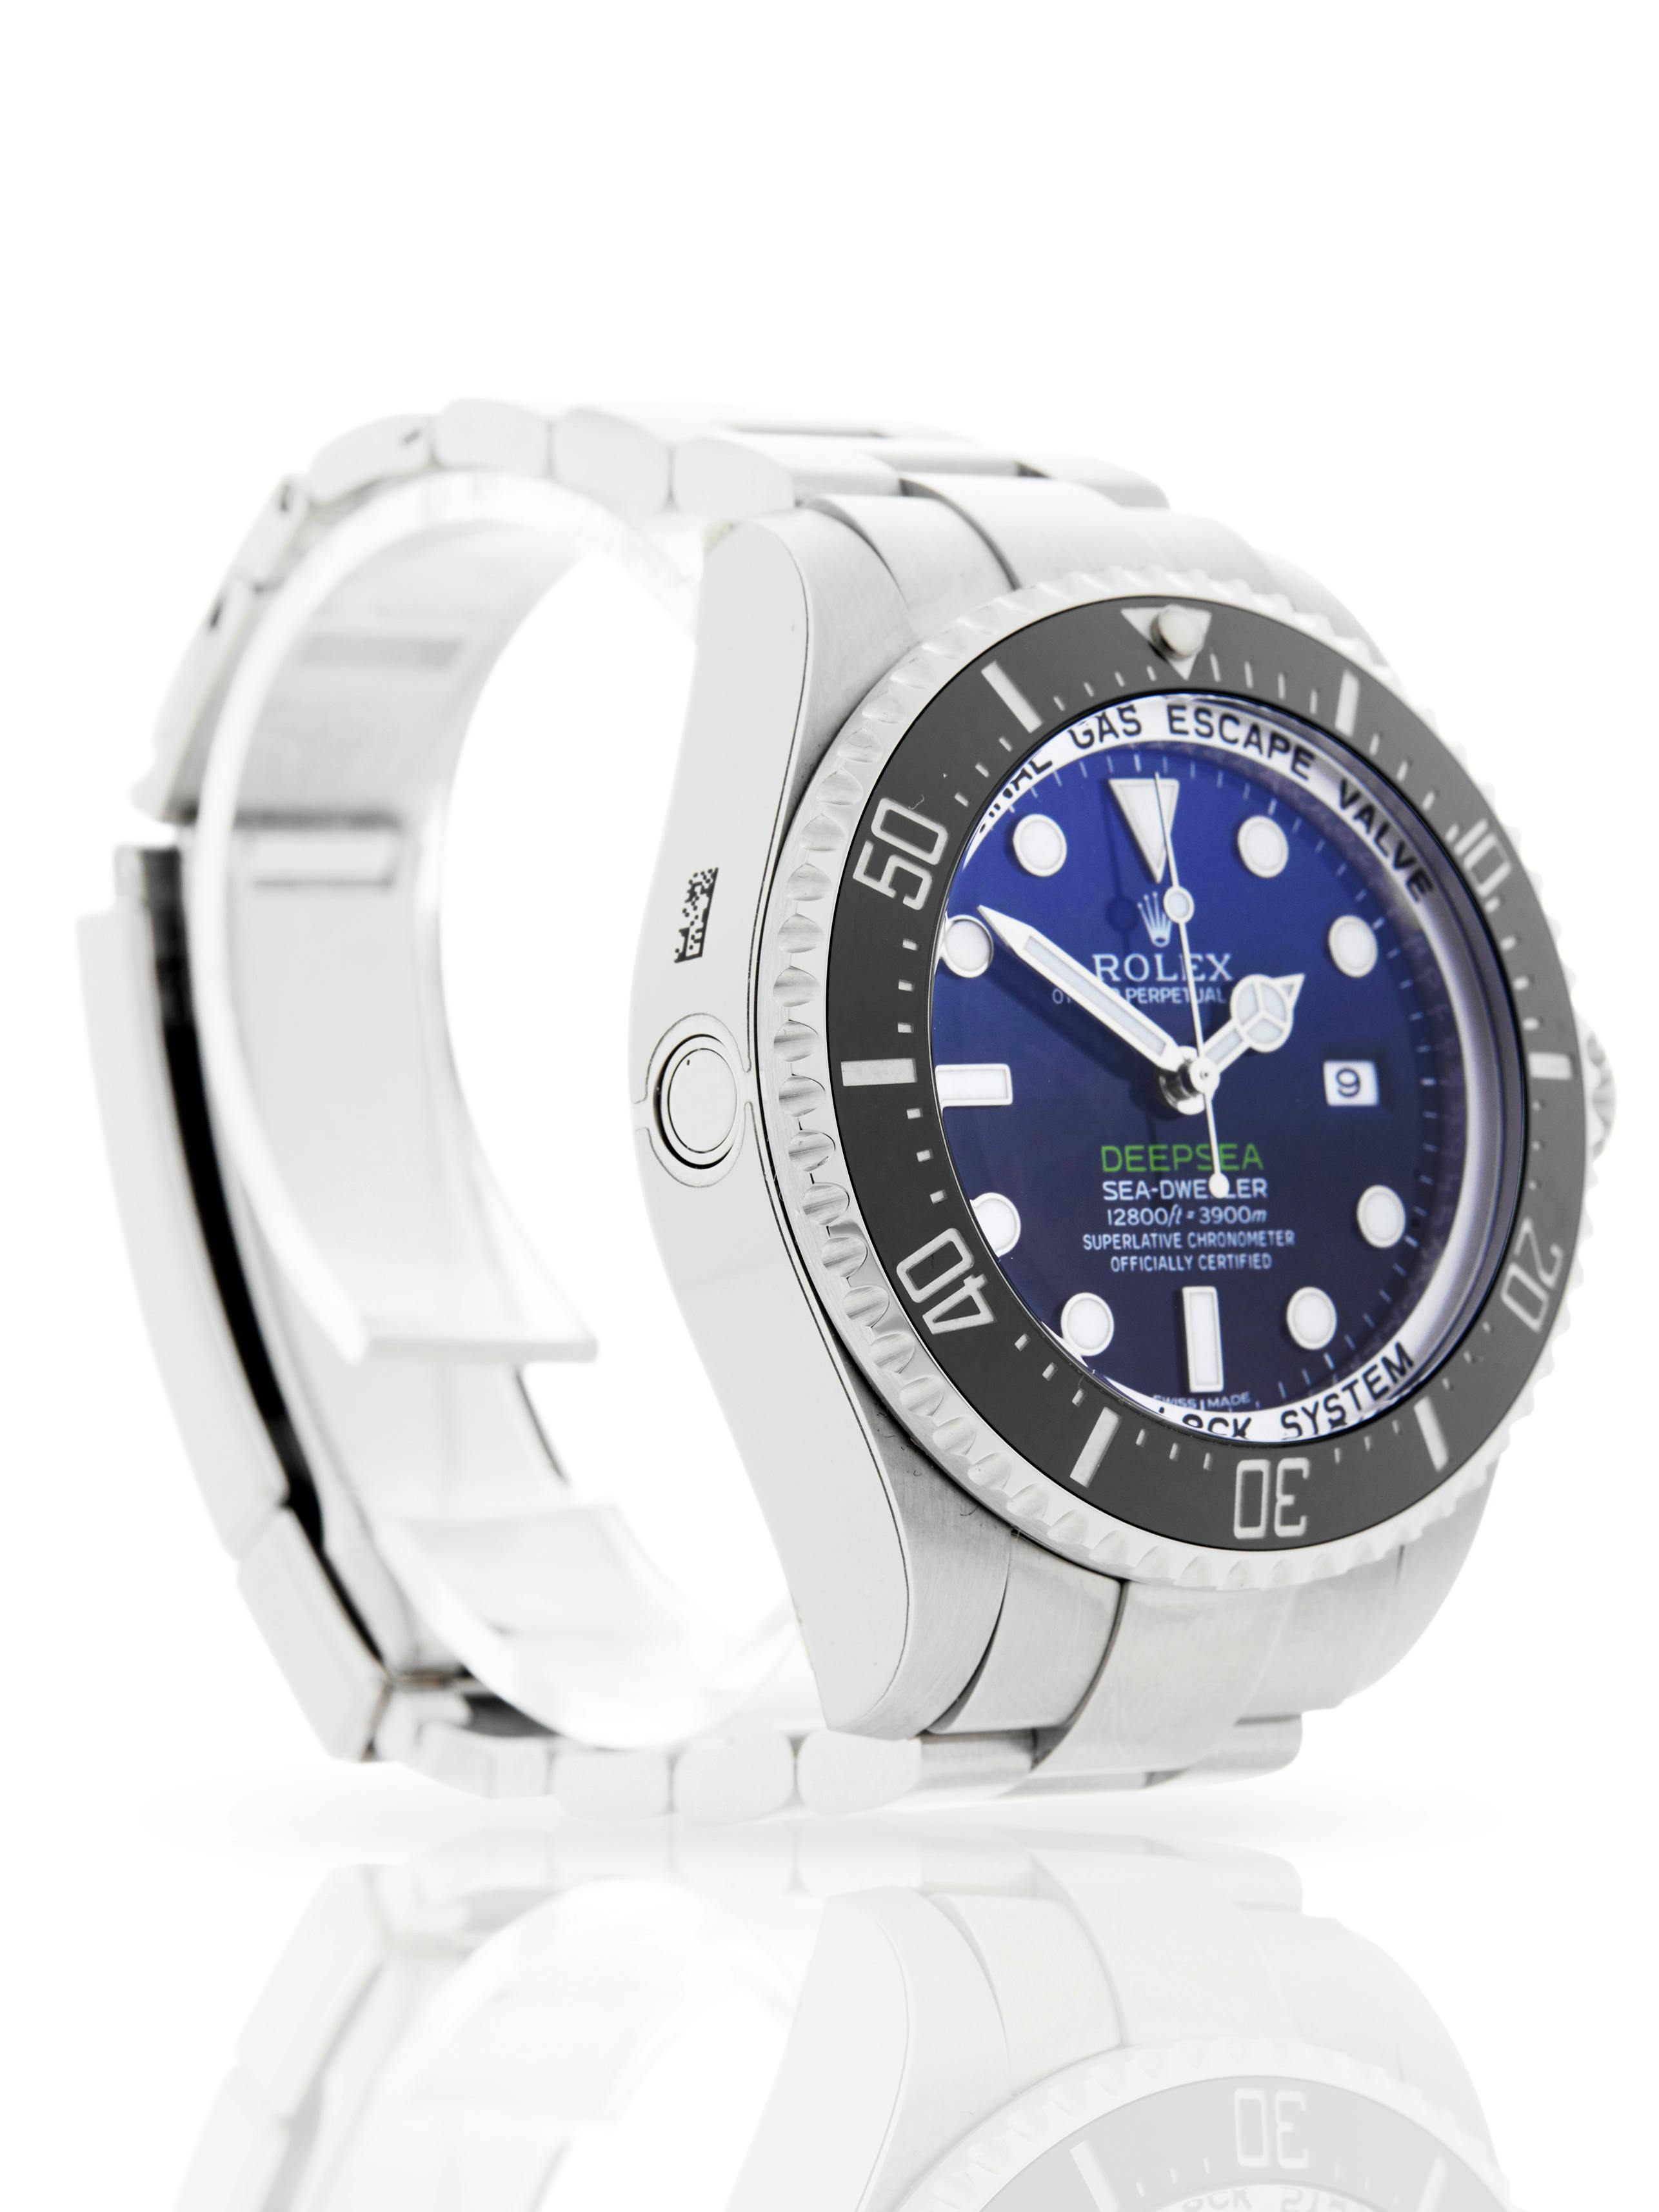 Rolex Deepsea watch with steel case bracelet black bezel and blue and black dial